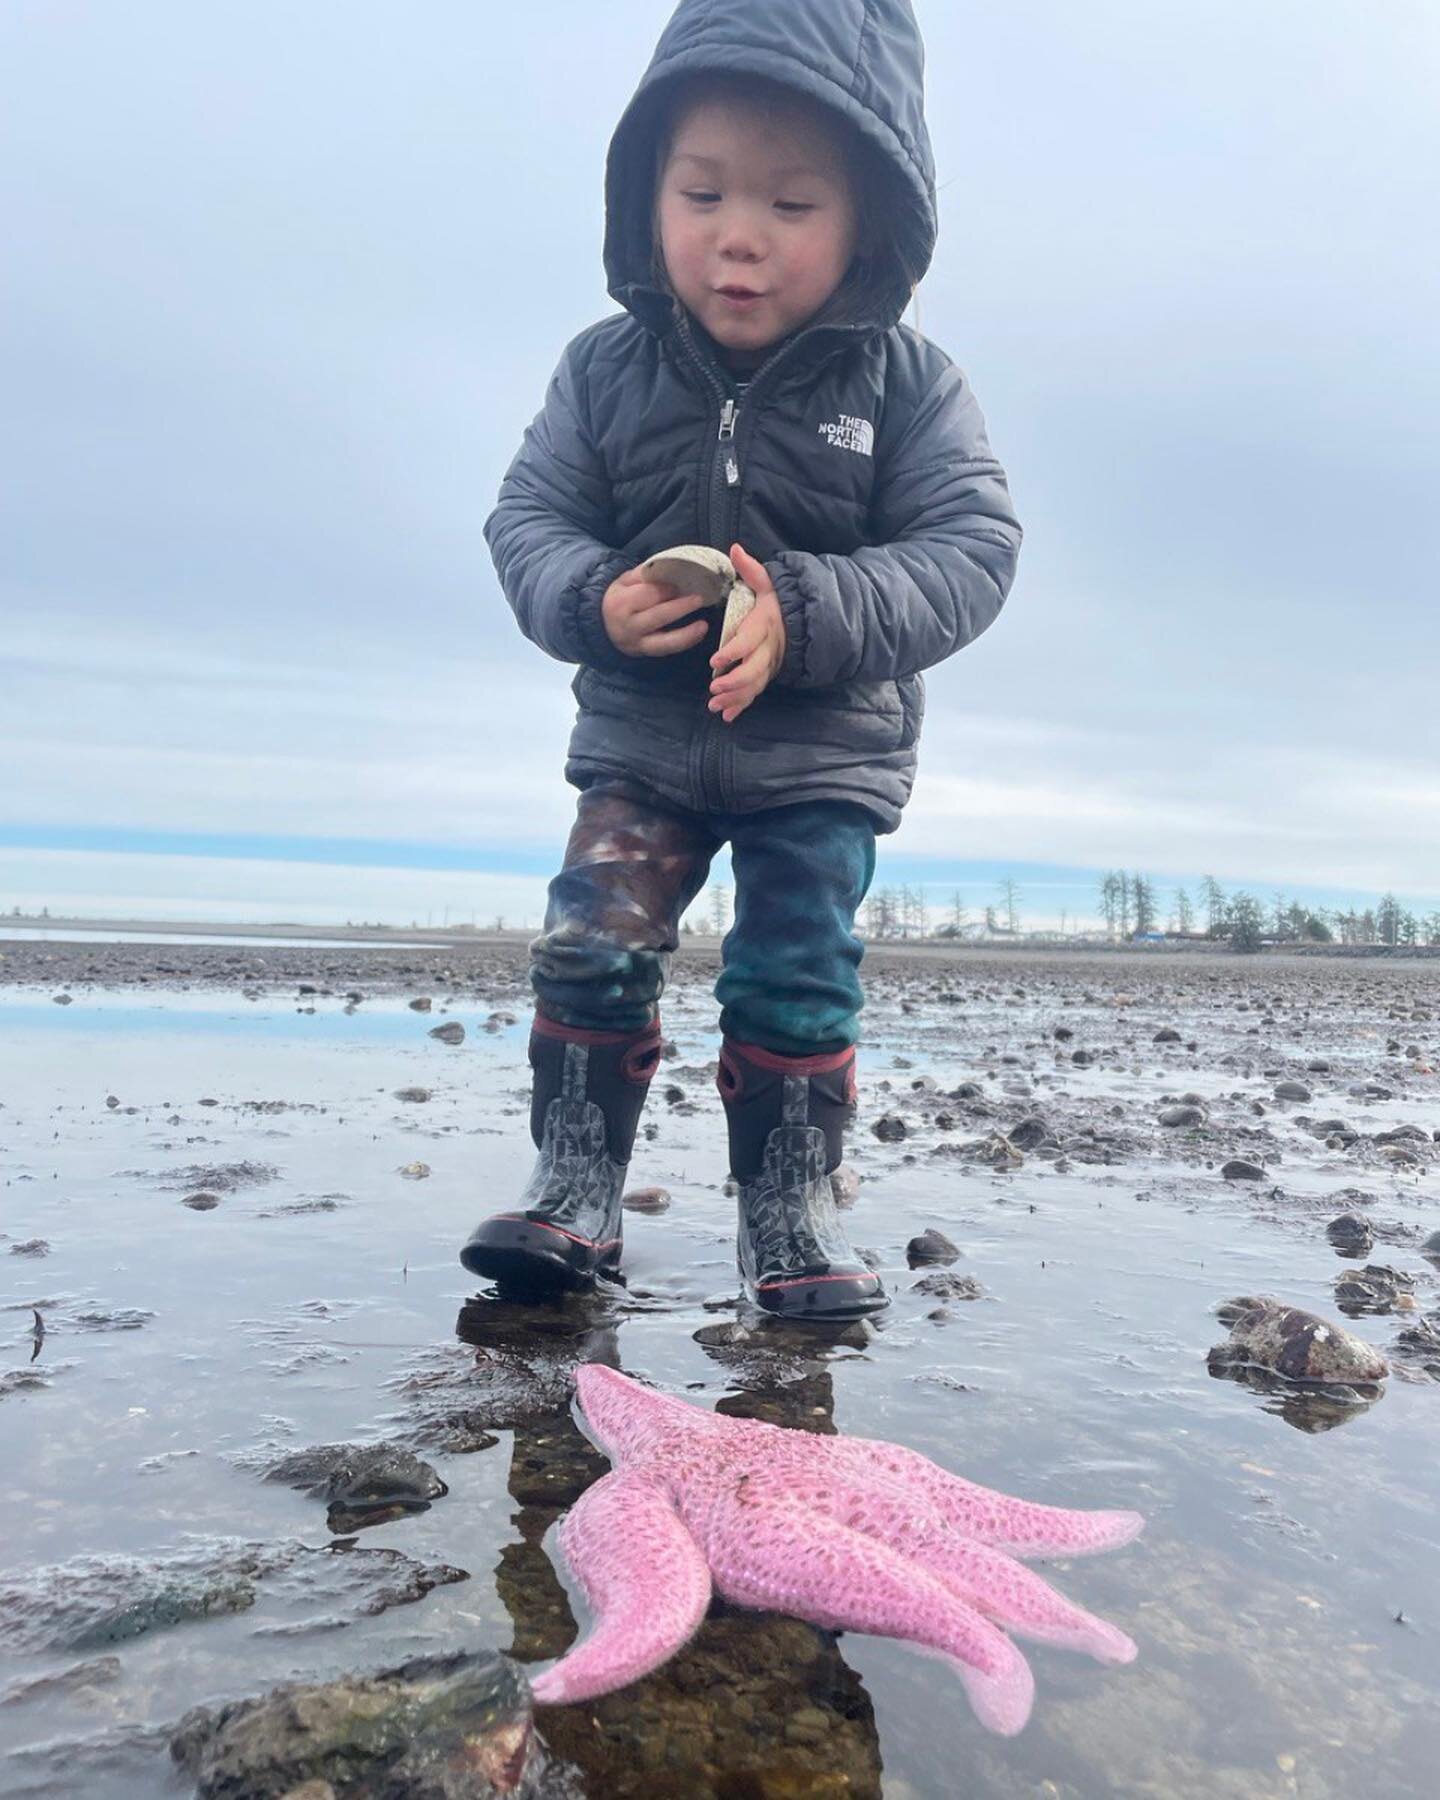 We found Patrick! 🪸⭐️

It's incredible to see sea stars back on our shores after the devasting sea star wasting disease was confirmed on Haida Gawii in 2015. A condition that killed millions of these stunning creatures at an unprecedented and alarmi